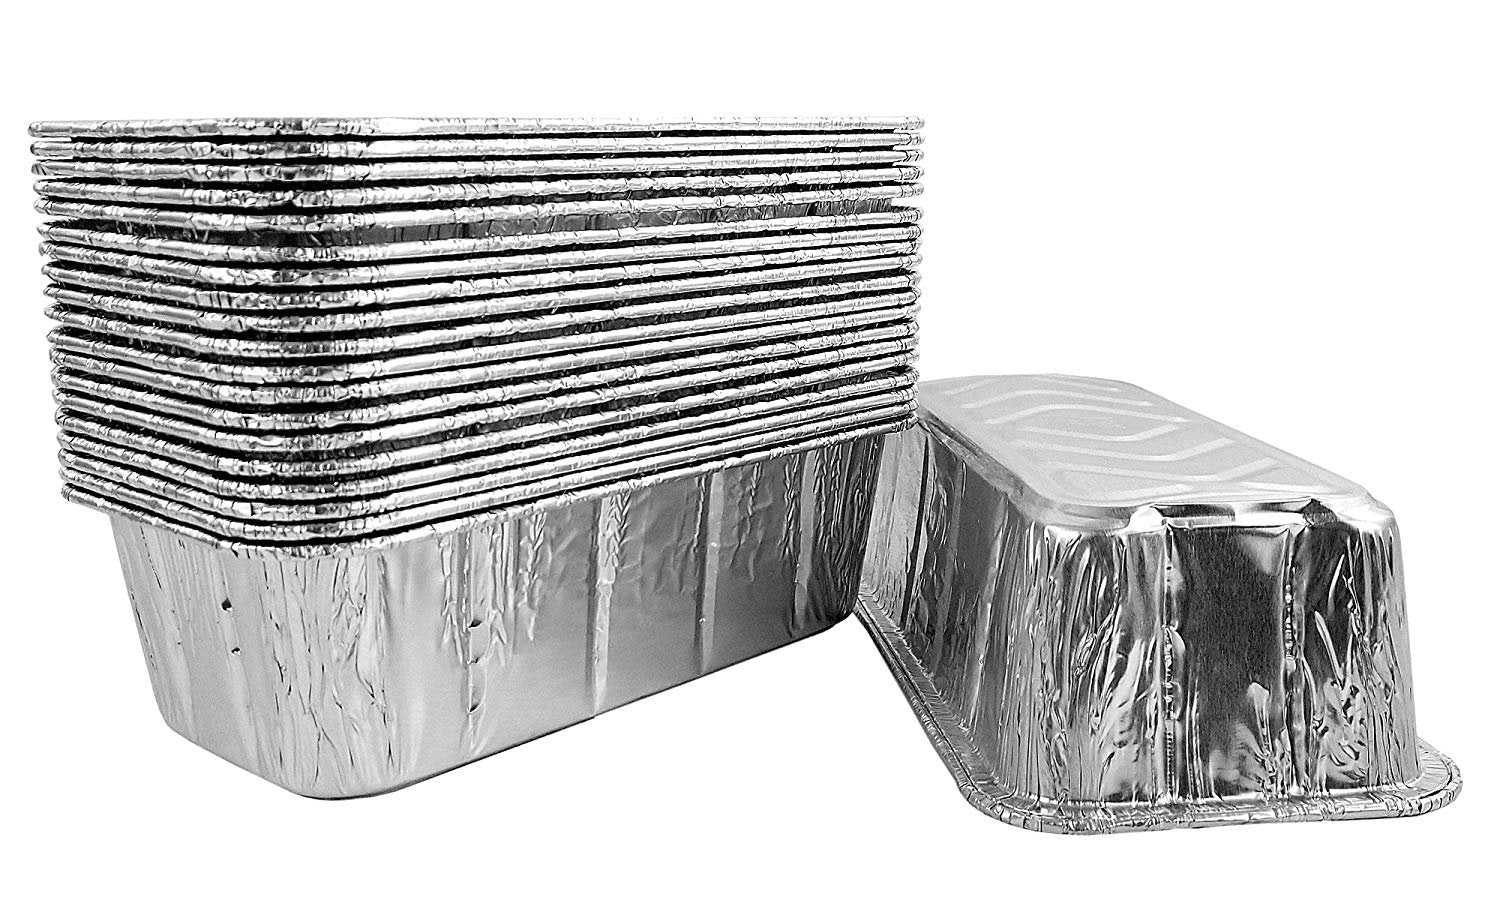 1½ lb. Foil Loaf Pan with Clear Dome Lid - #208P